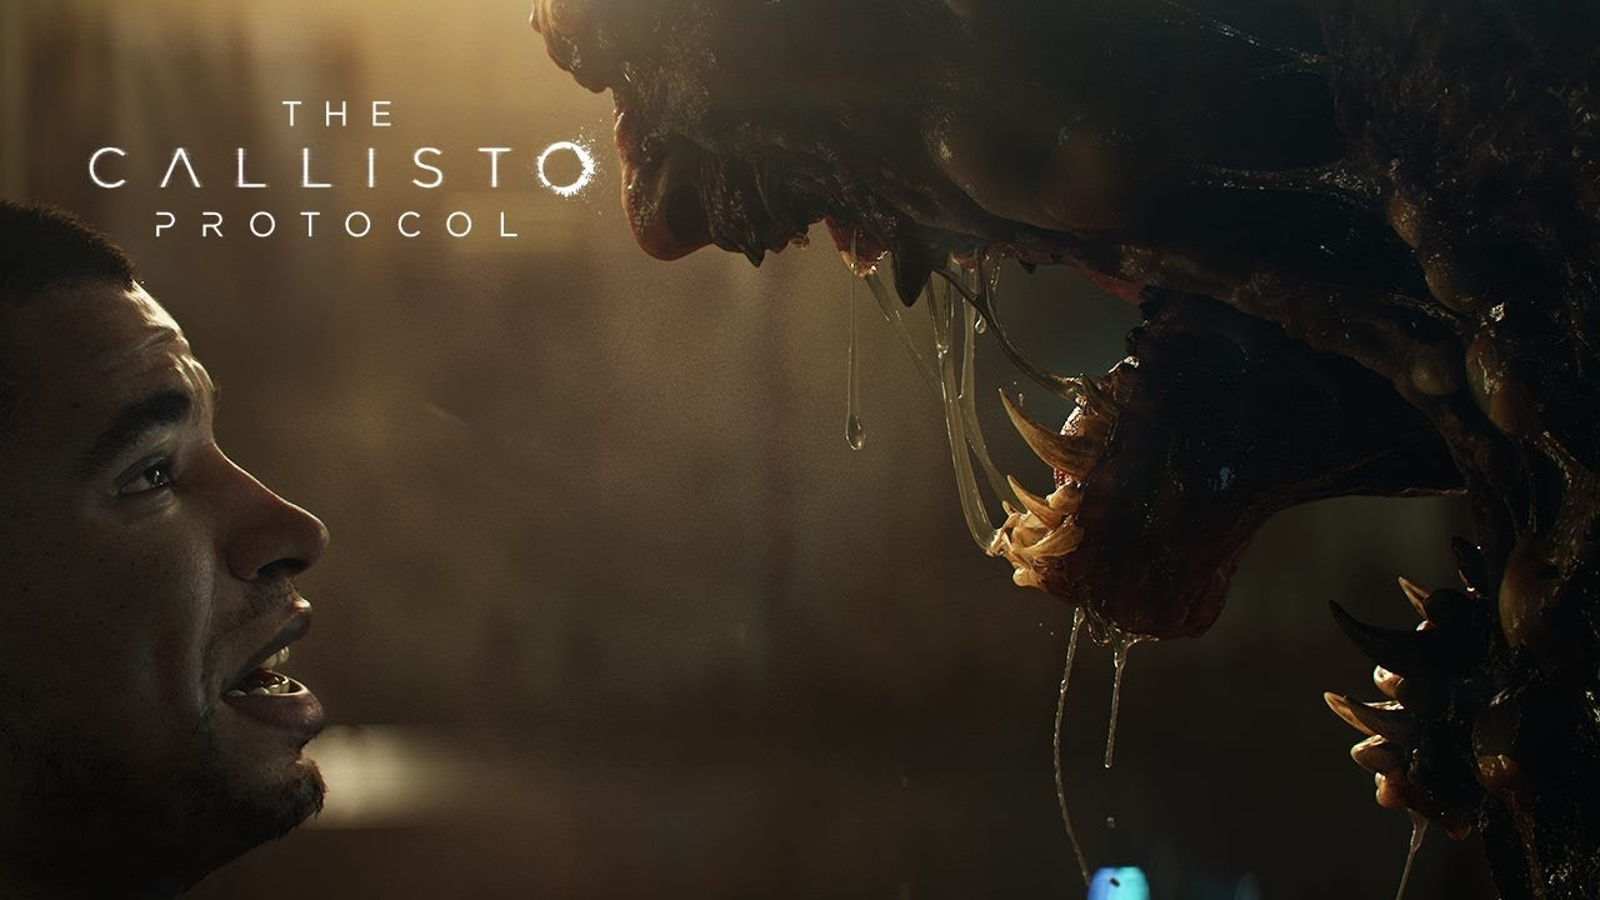 PlayStation Plus adds The Callisto Protocol for the spooky season